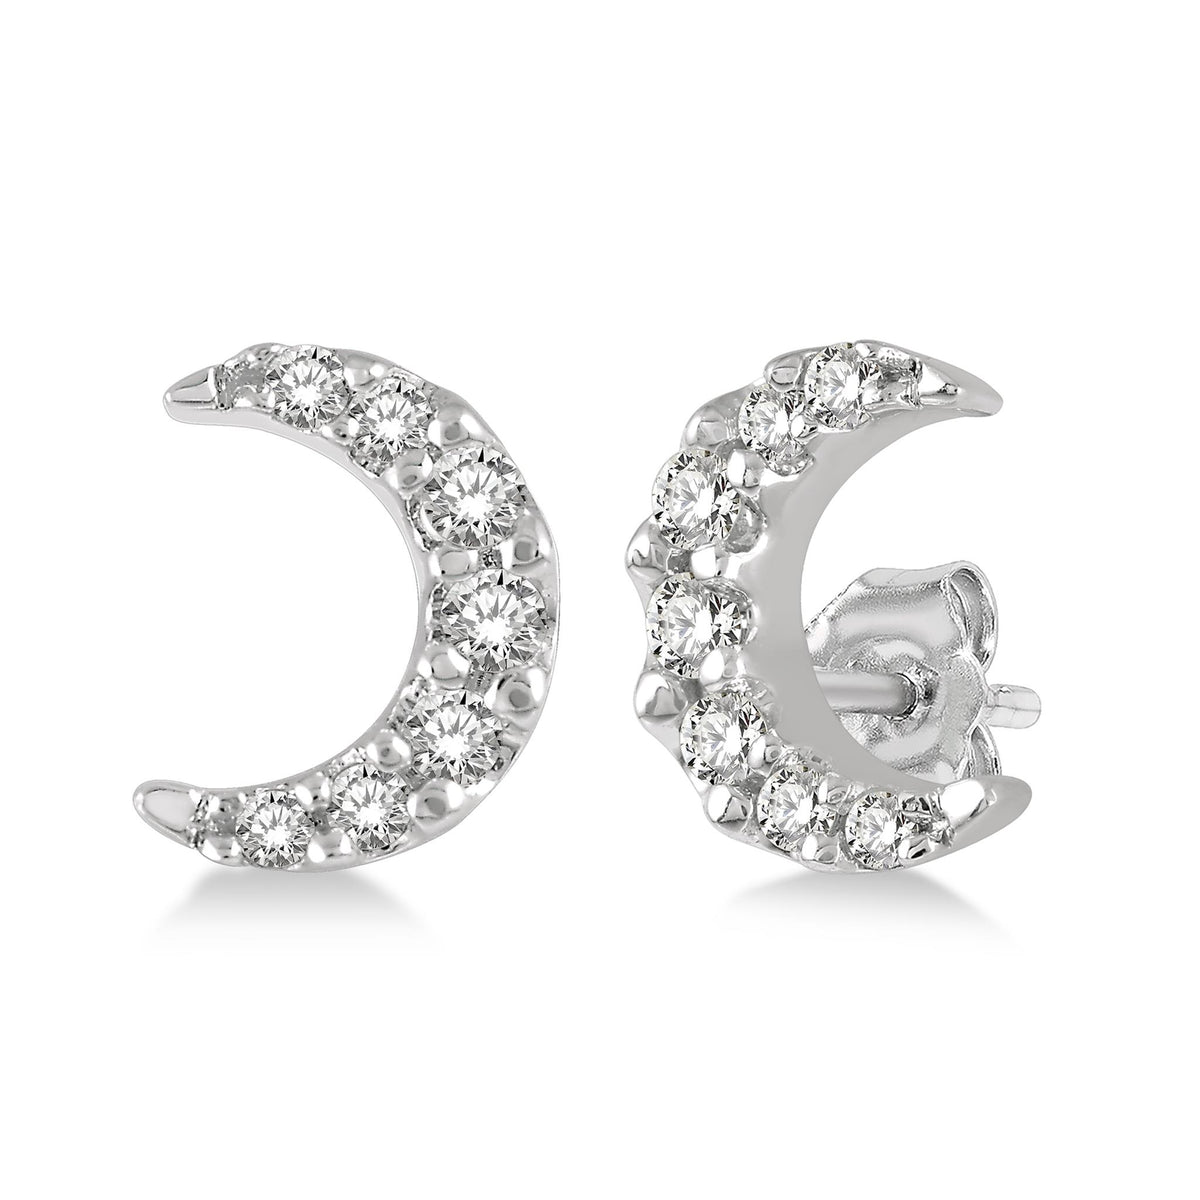 Lasker Petites-10Kt White Gold Crescent Stud Earrings with 0.08cttw Natural Diamonds